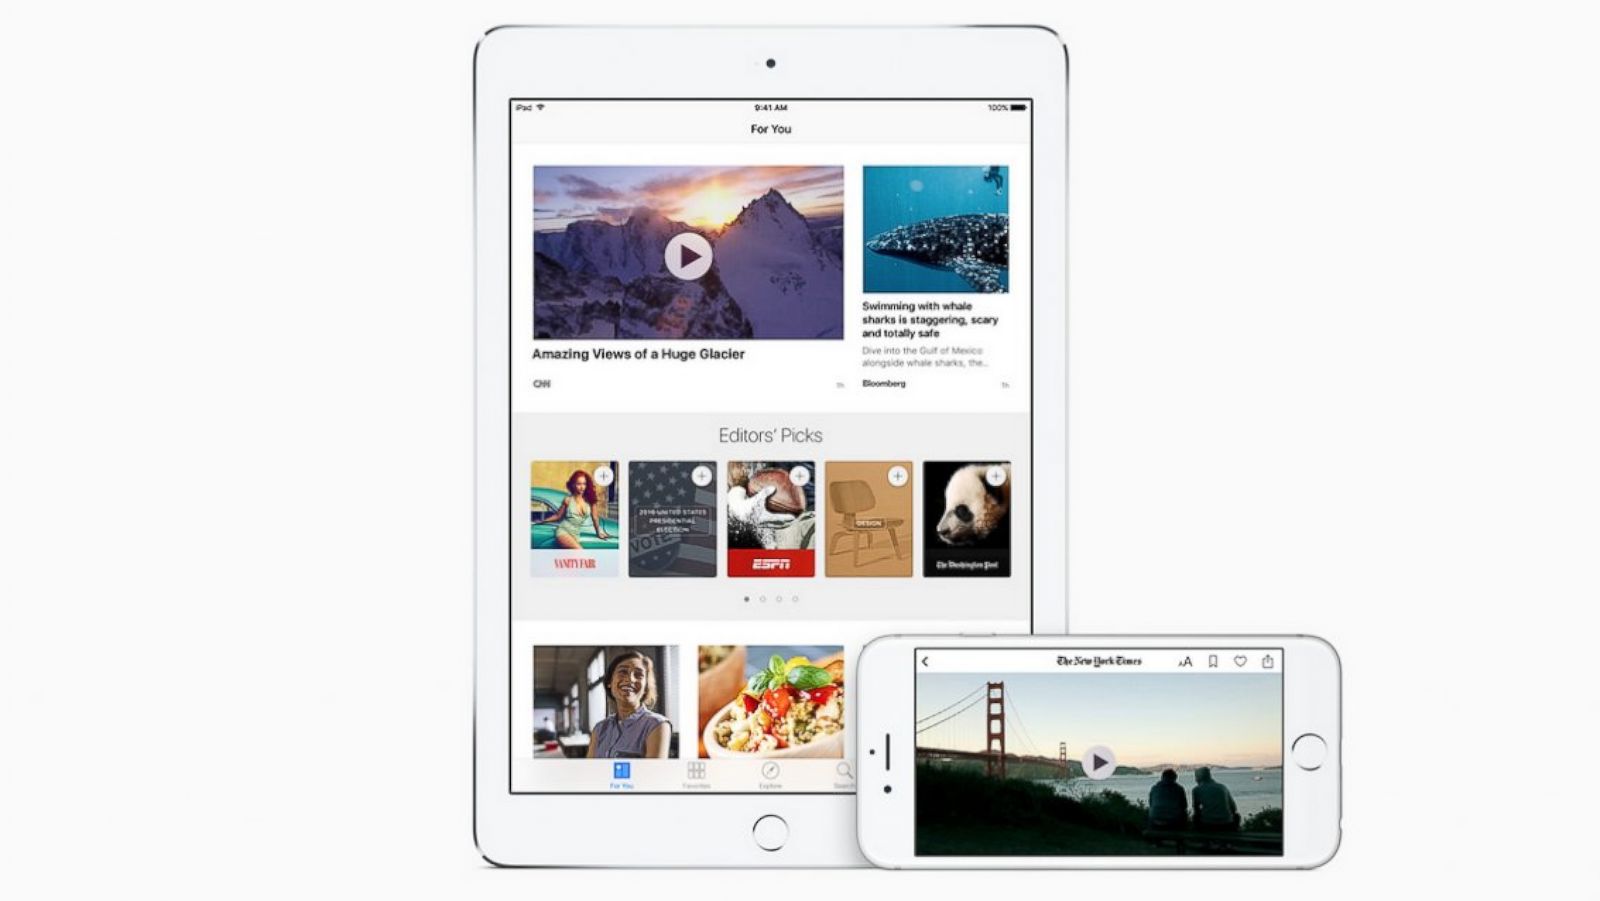 Apples iOS 9.3 Key New Features